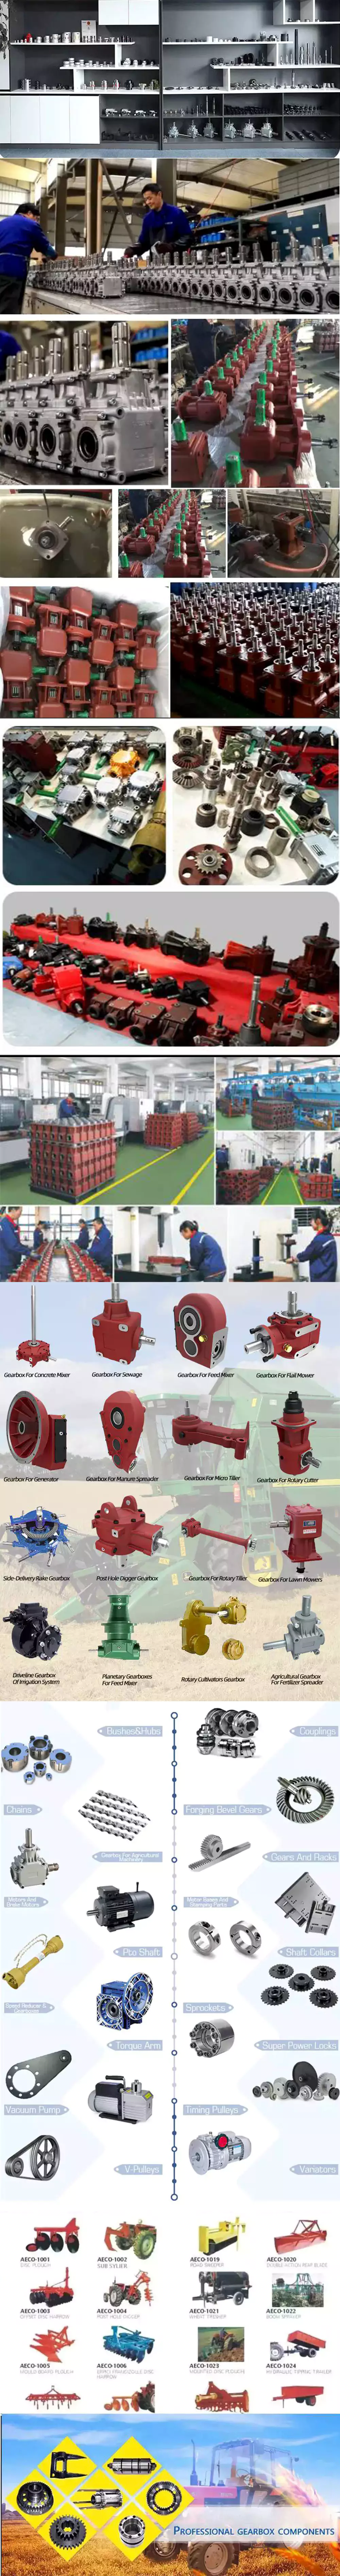 China R/F/K/S Hb Smr PC RC Reduction Industry Power Transmission Helical Gear Reduction Heavy Duty Gearbox     comer agricultural gearbox	